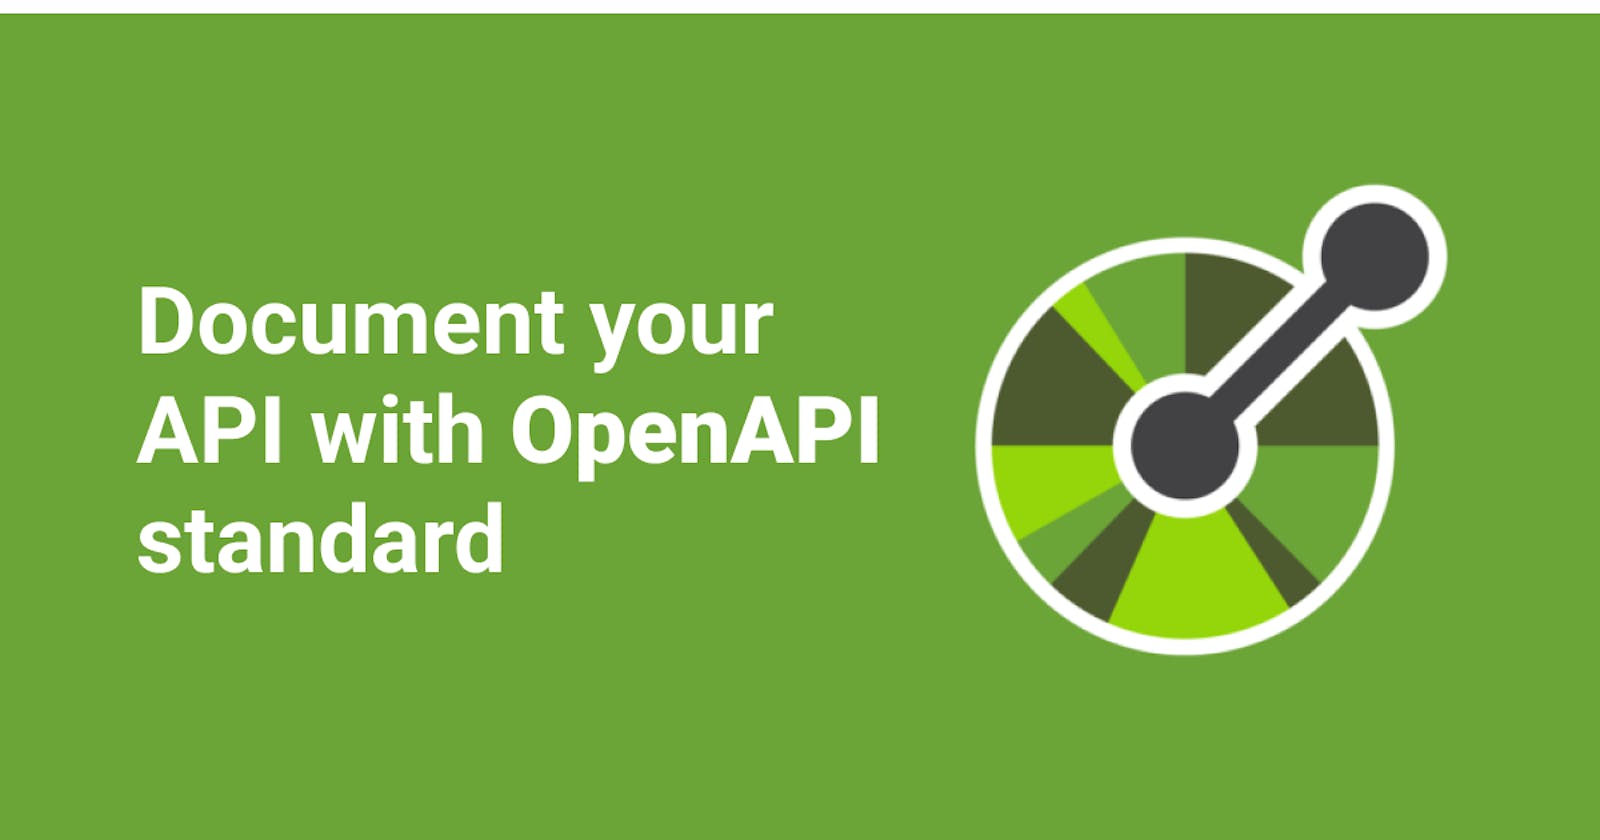 Documenting your API with OpenAPI standard